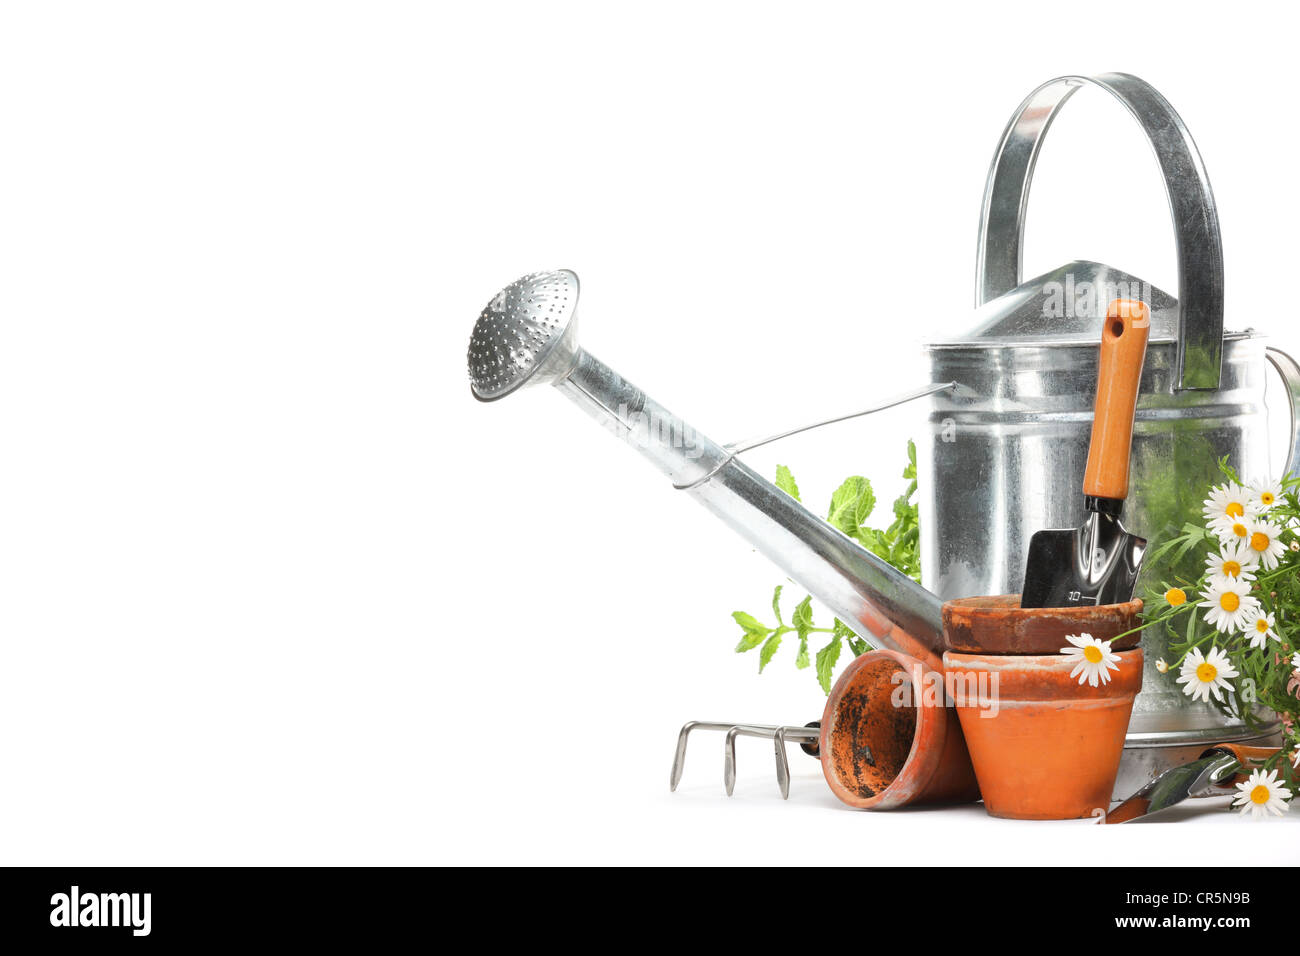 Gardening tools and flowers isolated on white with copy space. Stock Photo